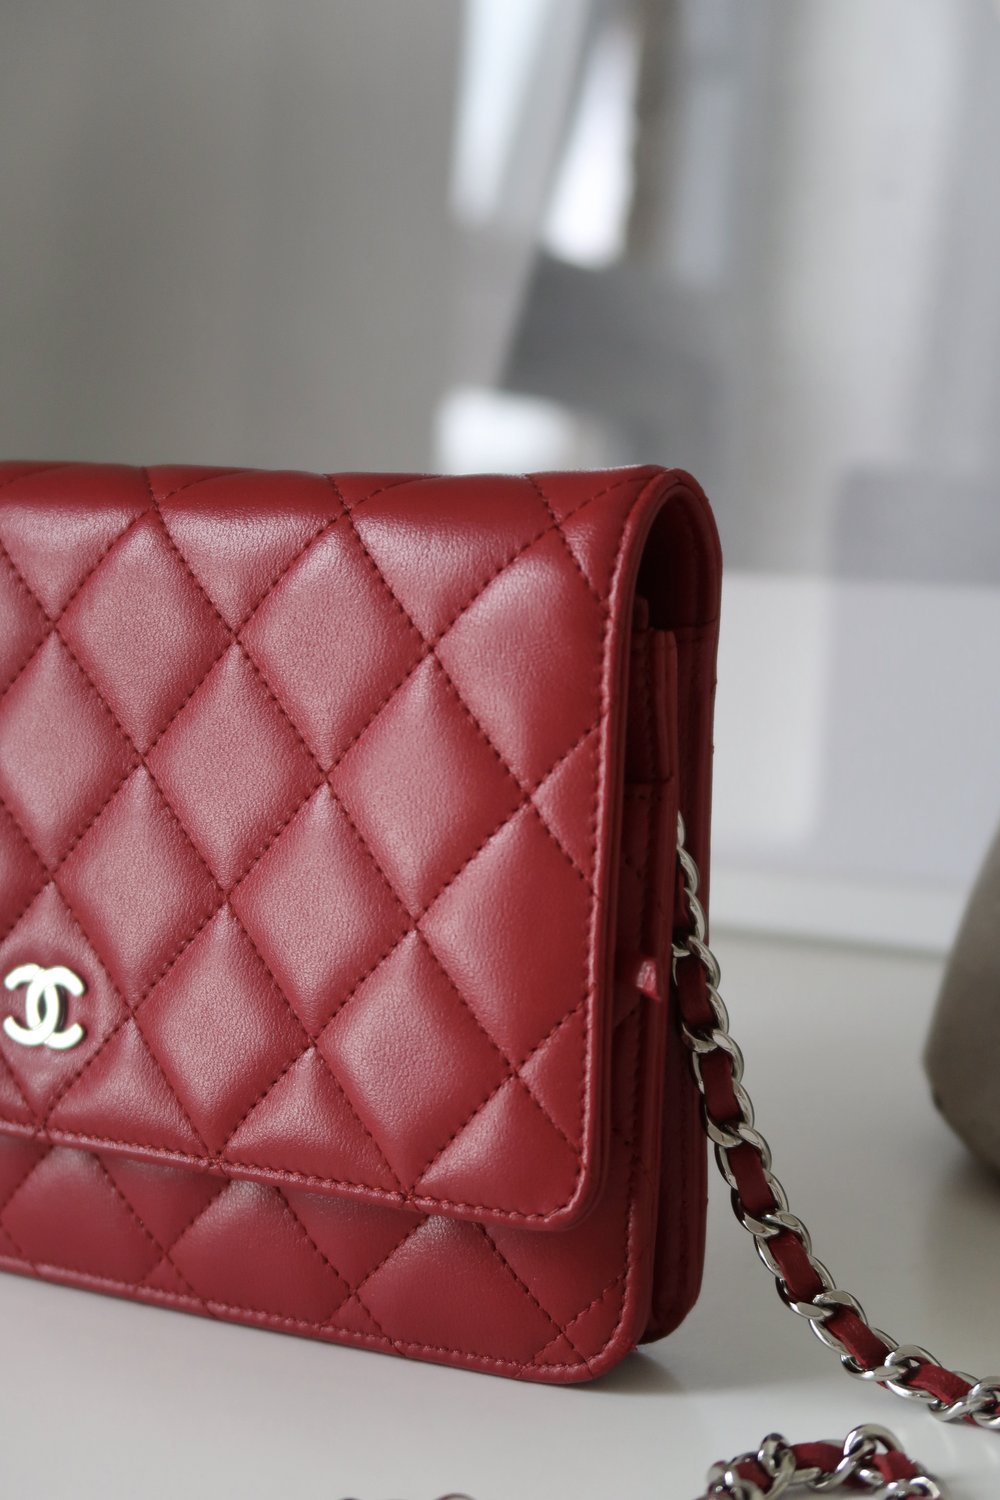 Chanel Red WOC 19 series; 2014 — Blaise Ruby Loves